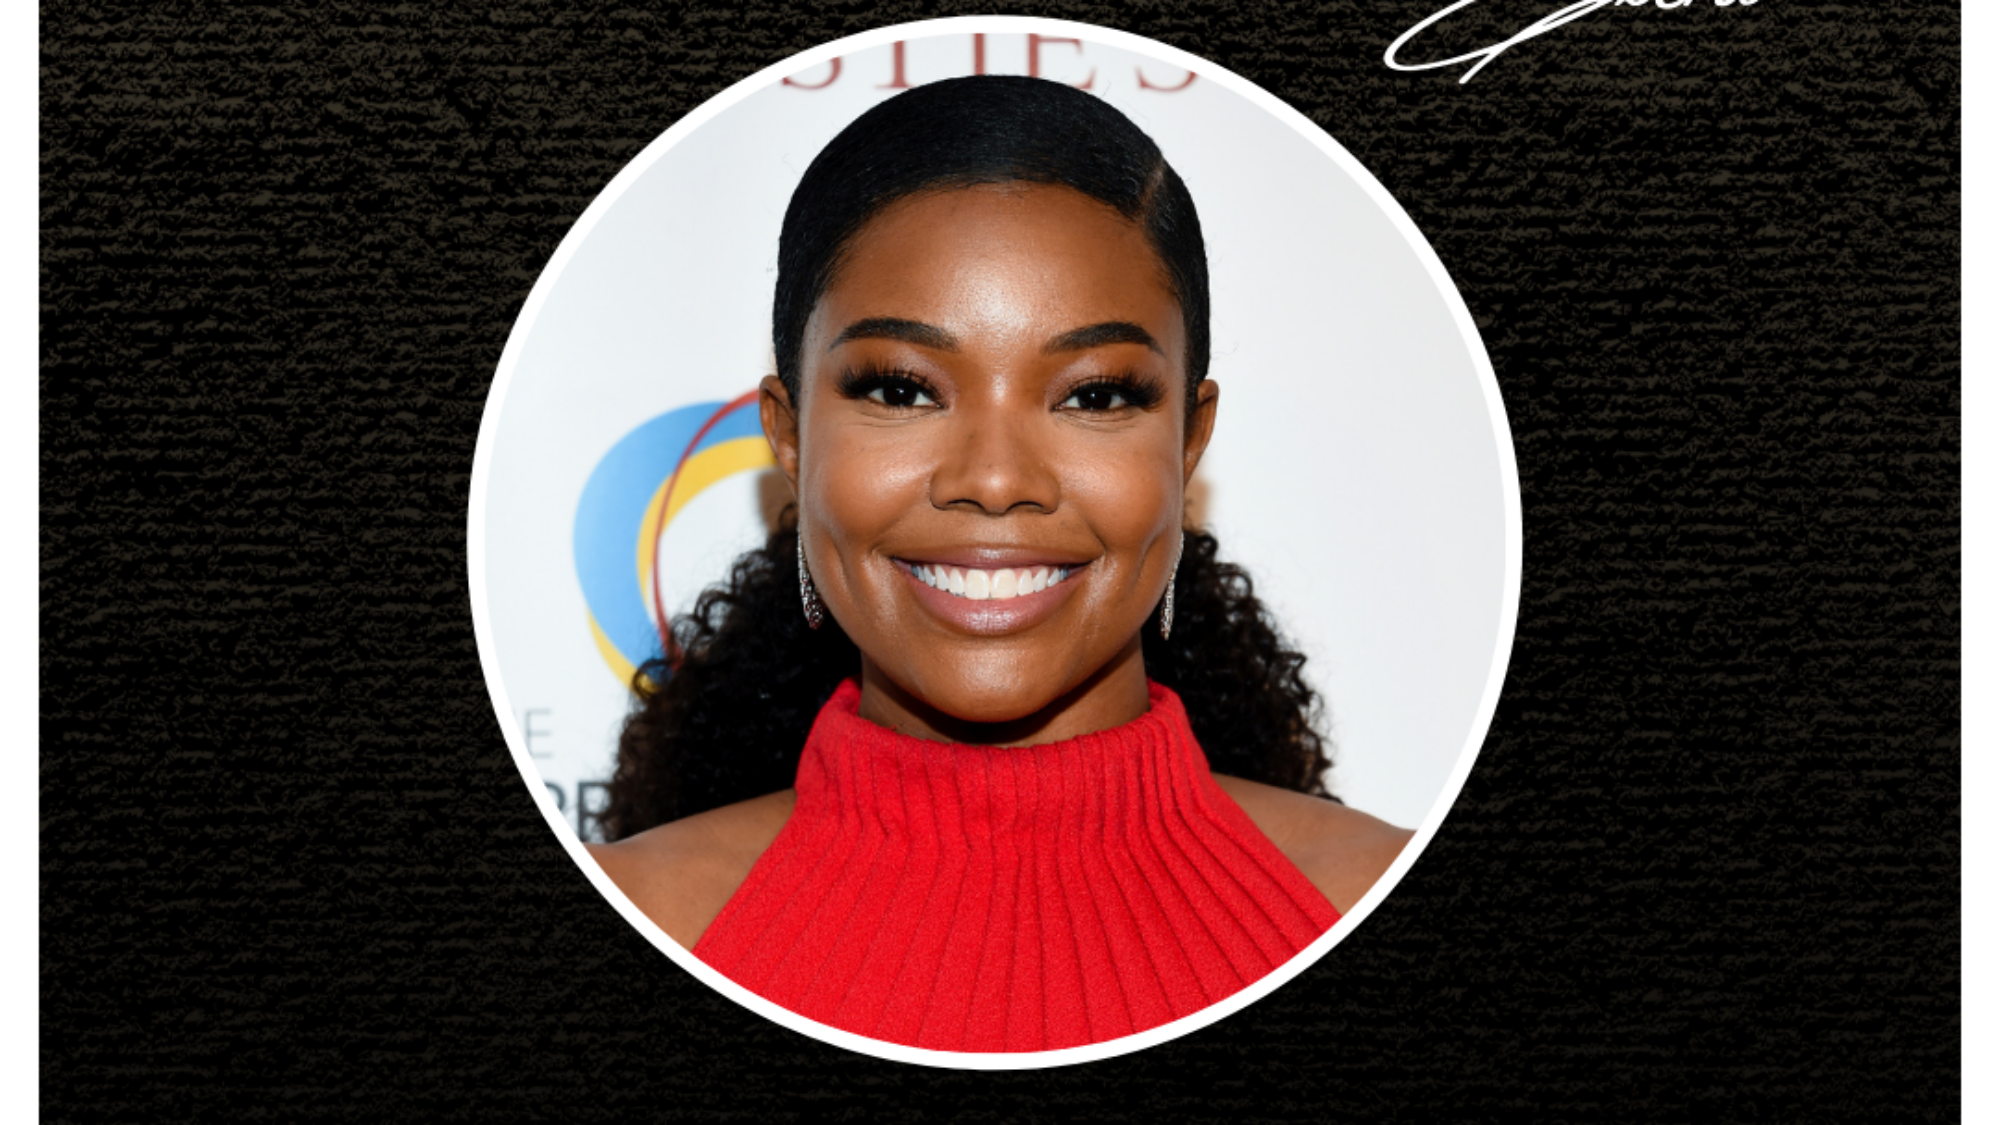 gabrielle union hollywood live extra